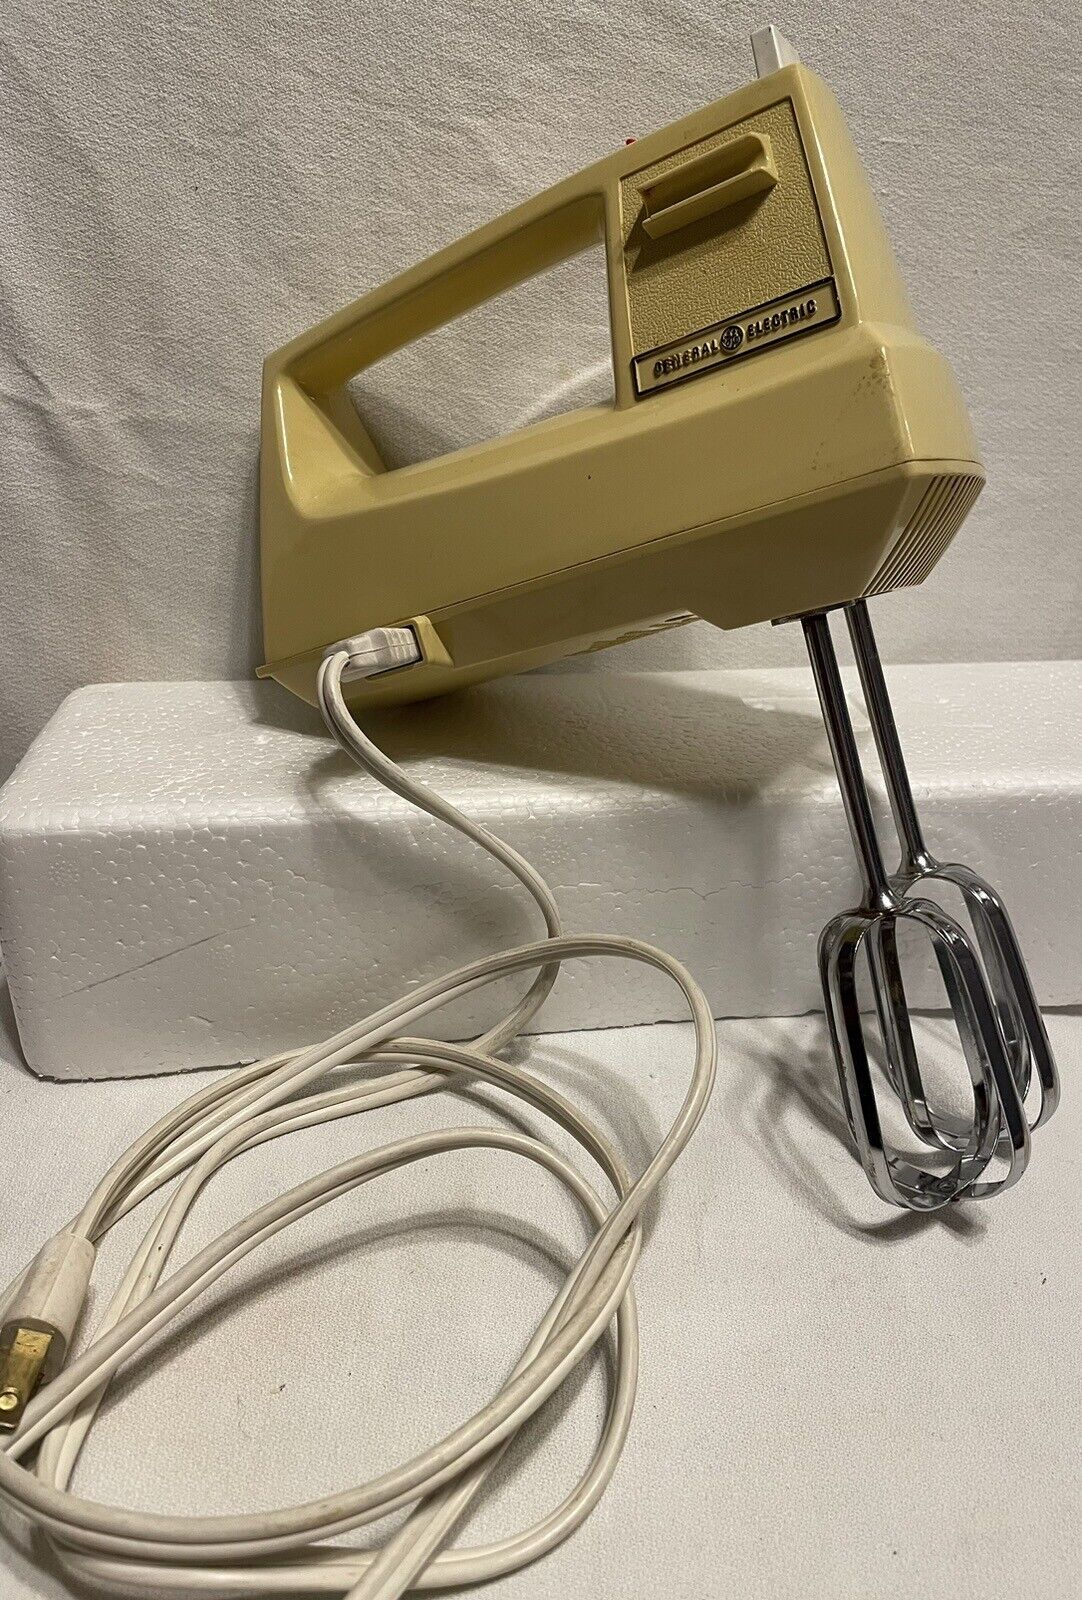 Vintage General Electric Harvest Gold Hand Mixer/Beater GE 3-Speed D1M24 TESTED